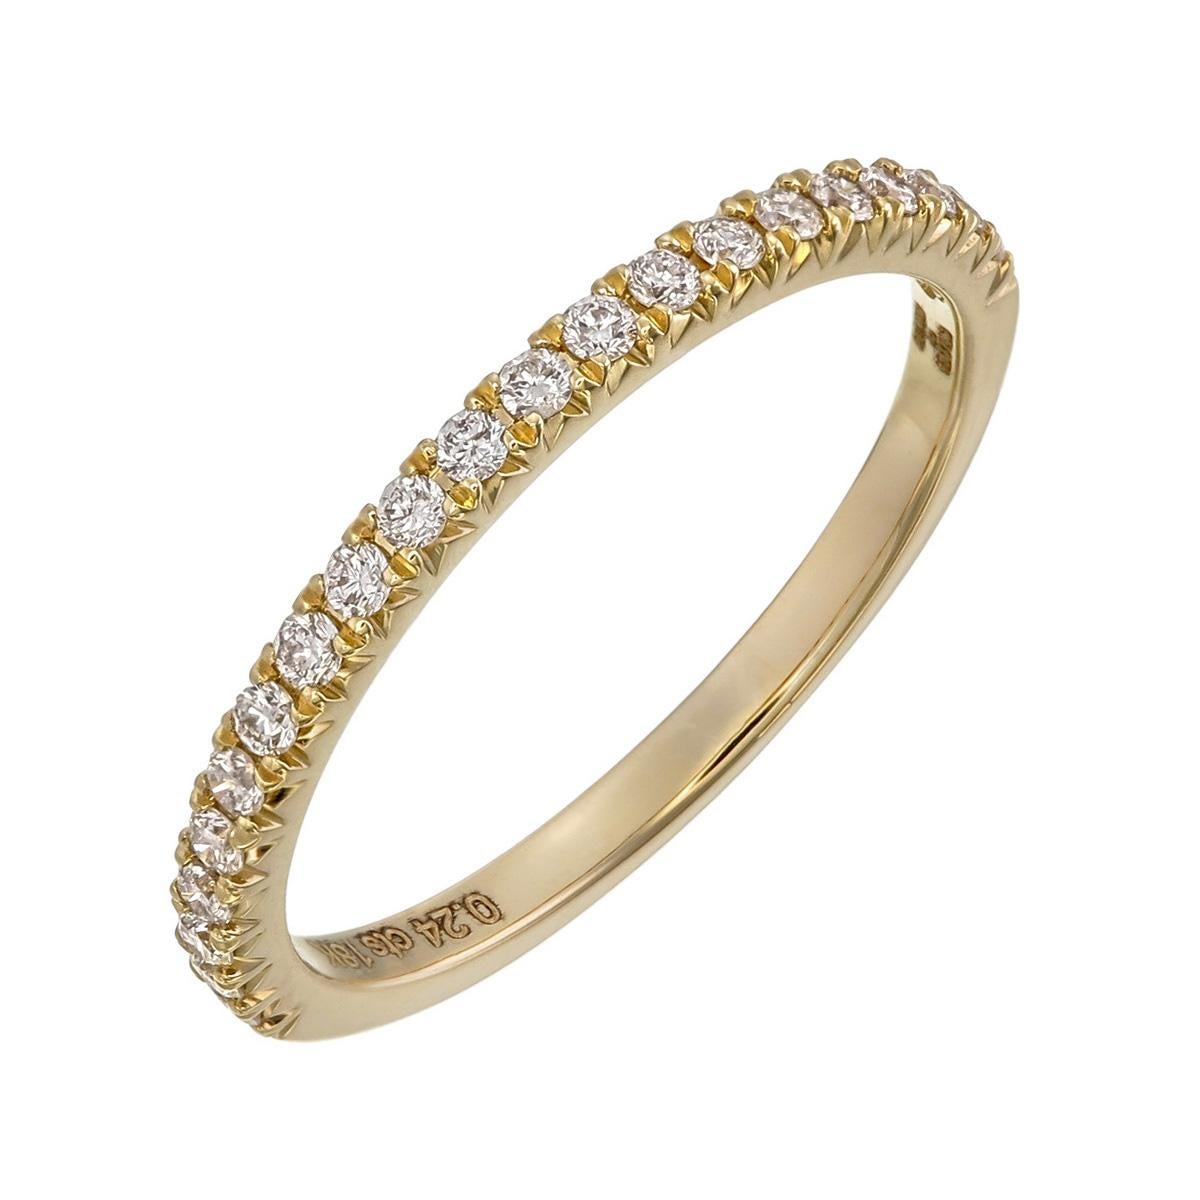 Orloff of Denmark;
Time-honored elegance finds form in this 18 Karat yellow gold ring, adorned with 21 exquisite SI2, F color diamonds. The classic half-band captures the essence of traditional design while embracing the modern allure of